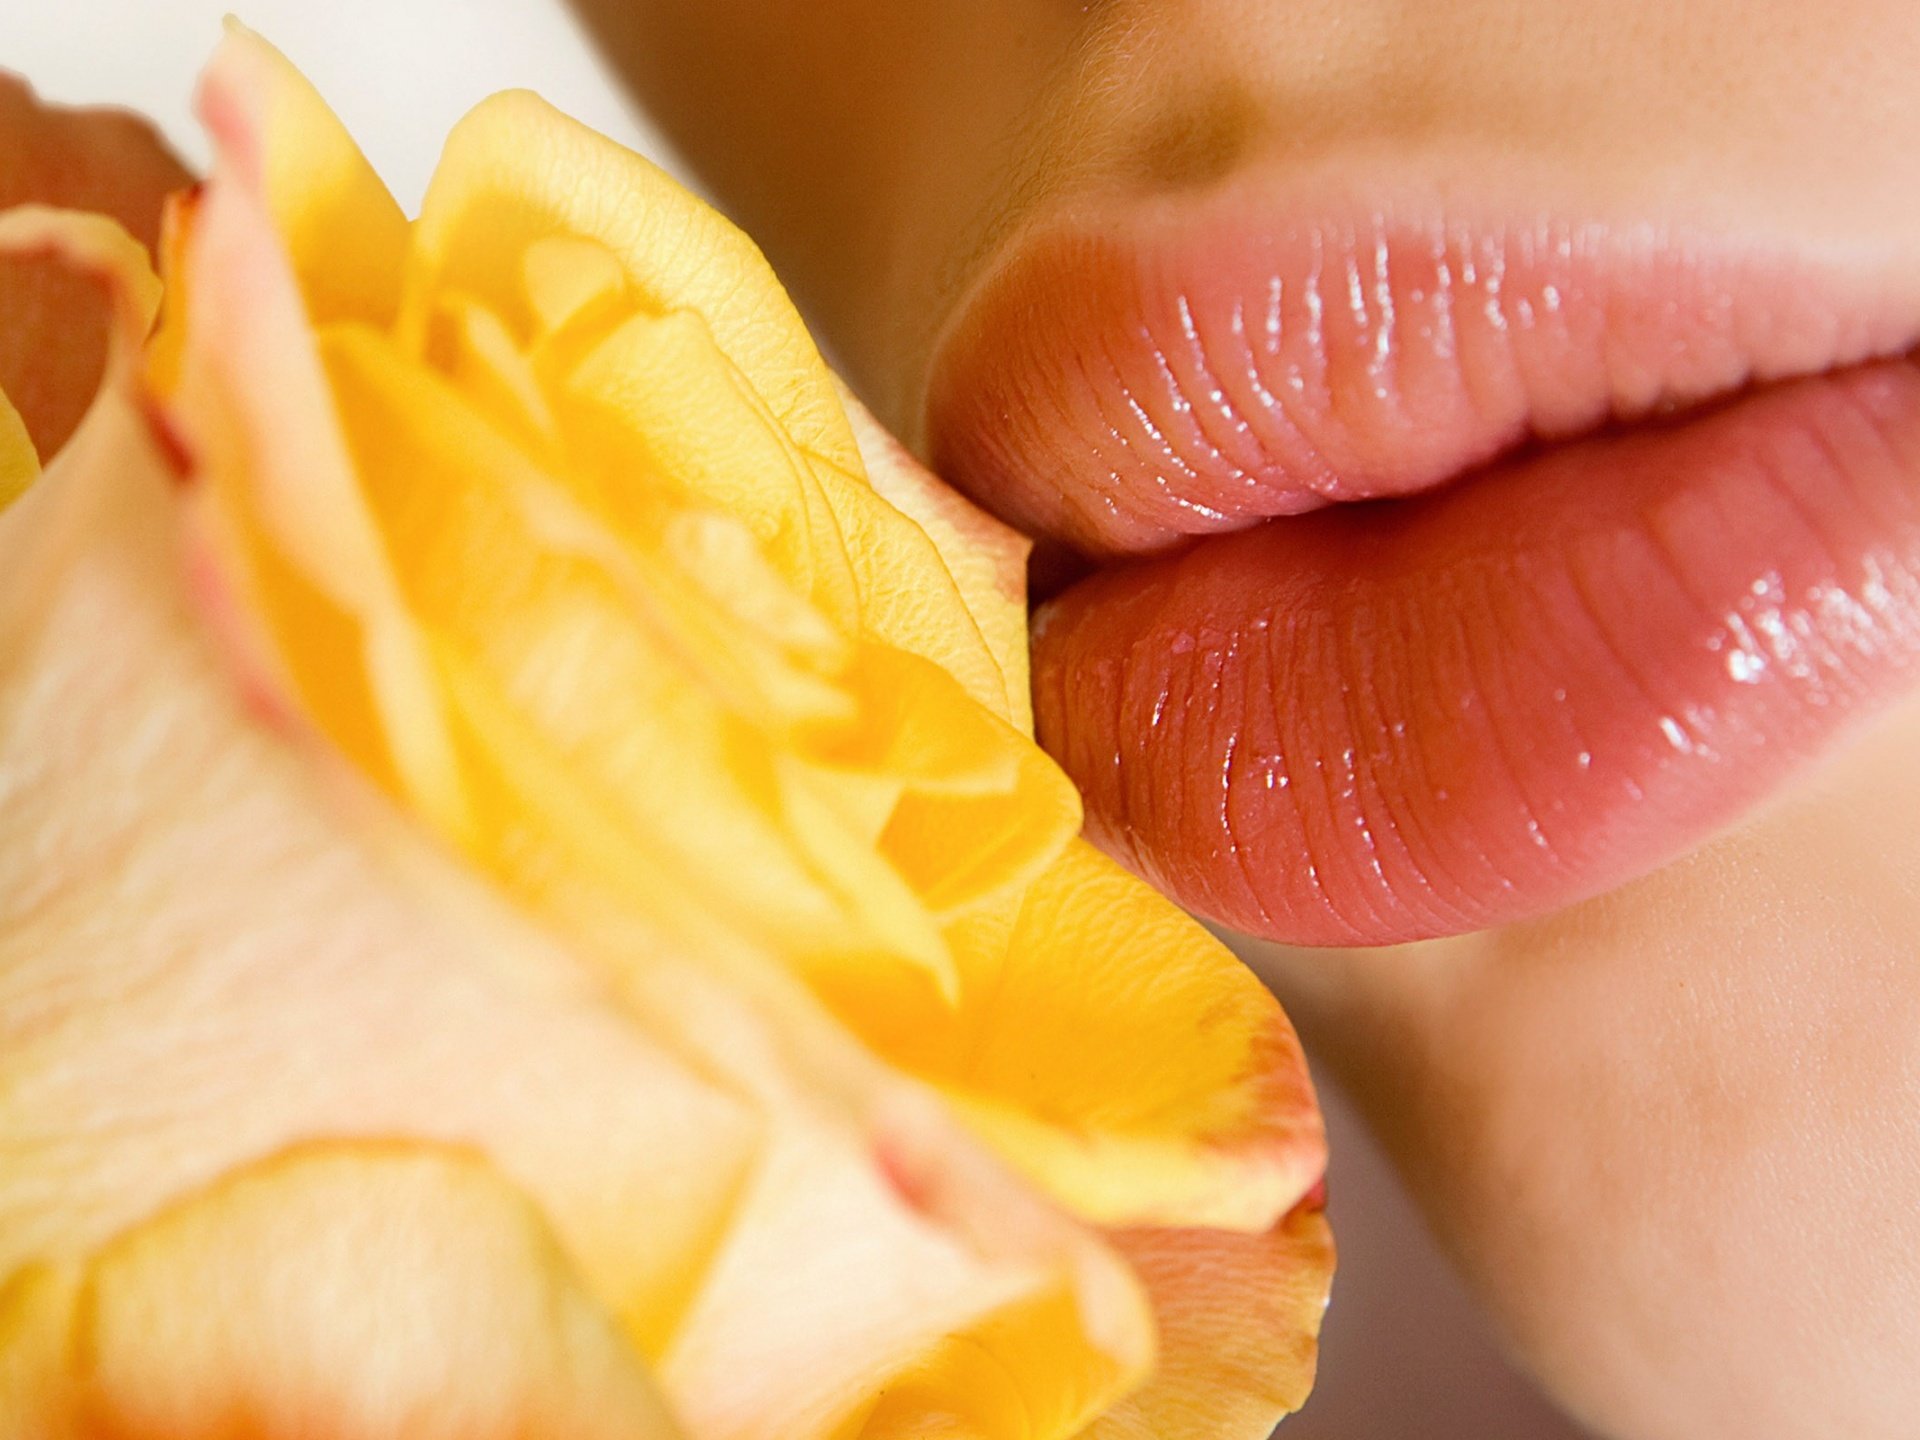 Artistic-Image-Red-Lips-Kissing-the-Flower-the-Lucky-One.jpg